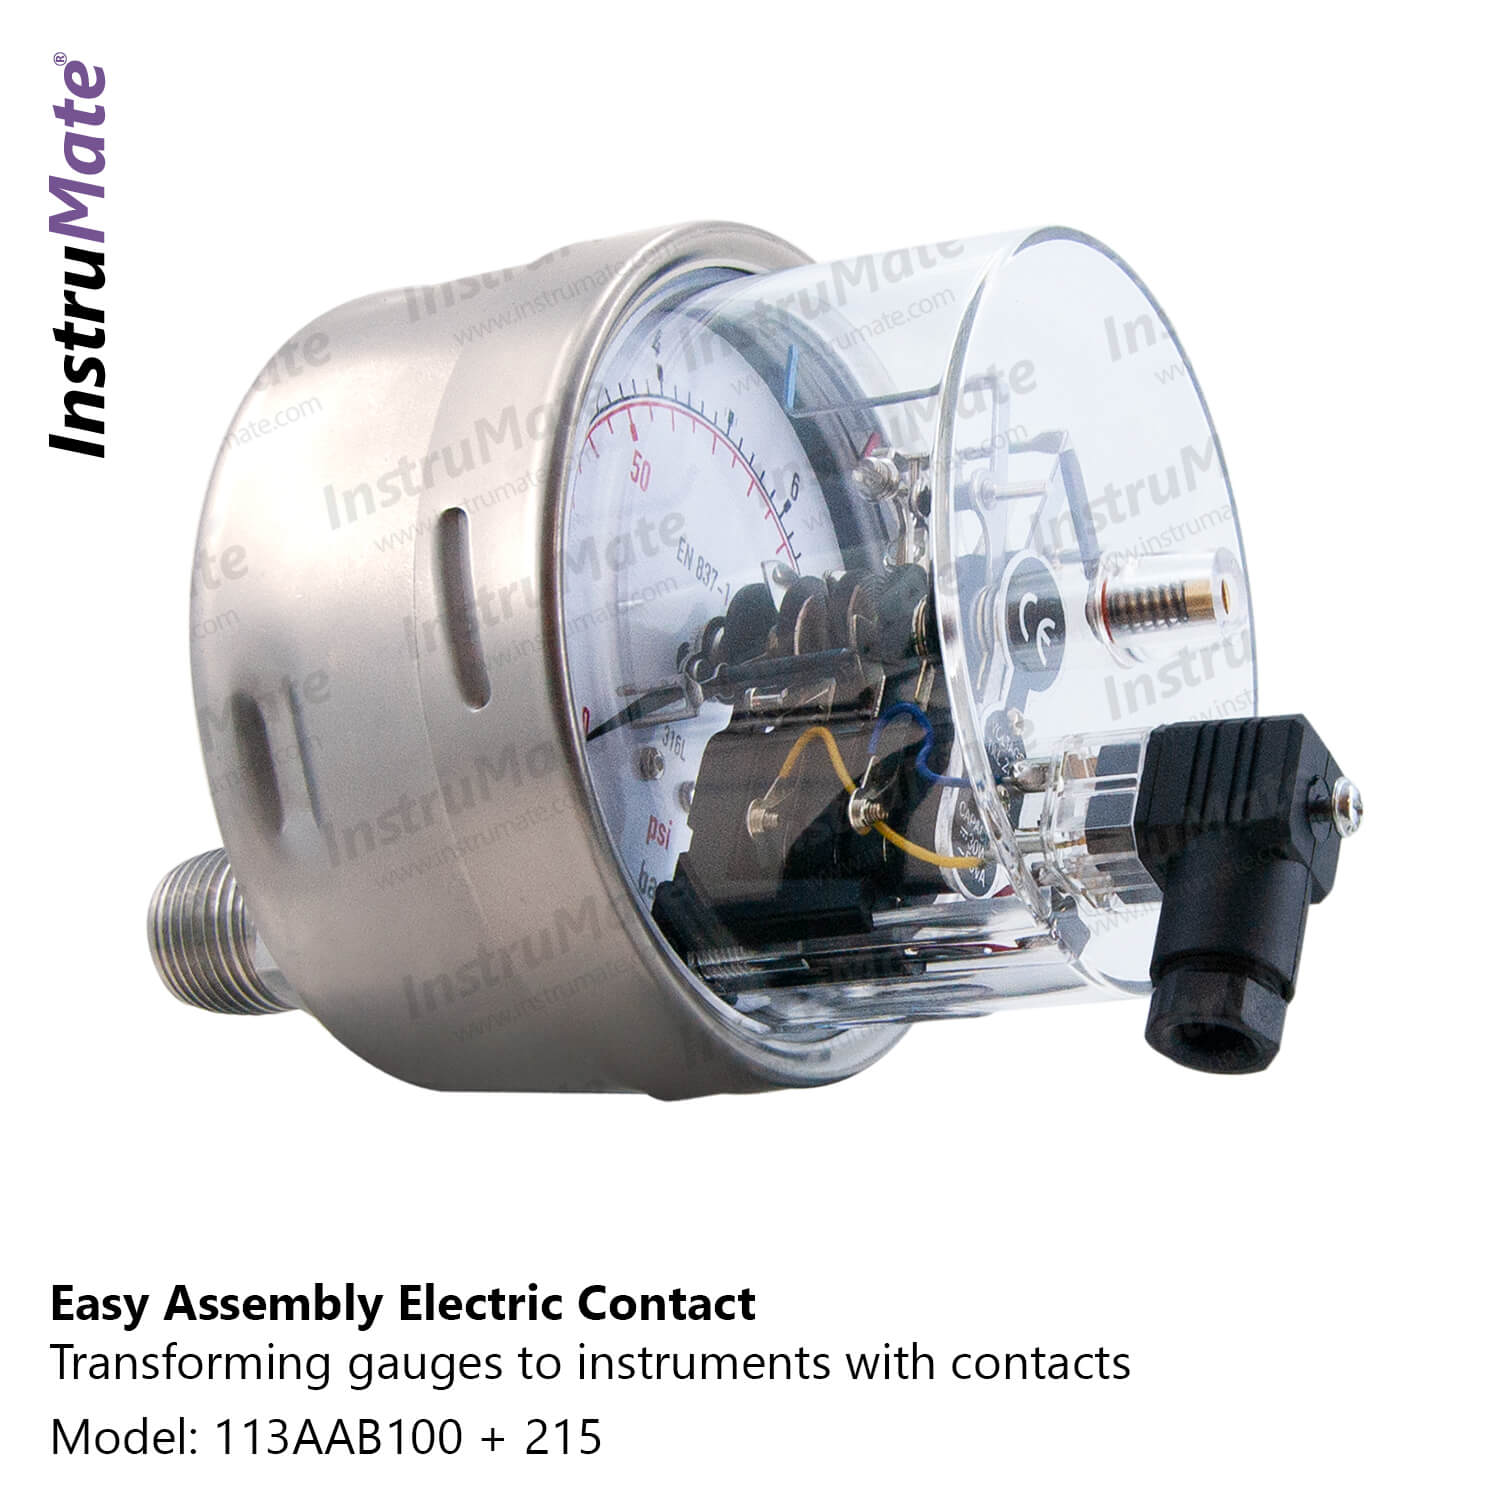 Easy Assembly Electric Contact - 215 - InstruMatea